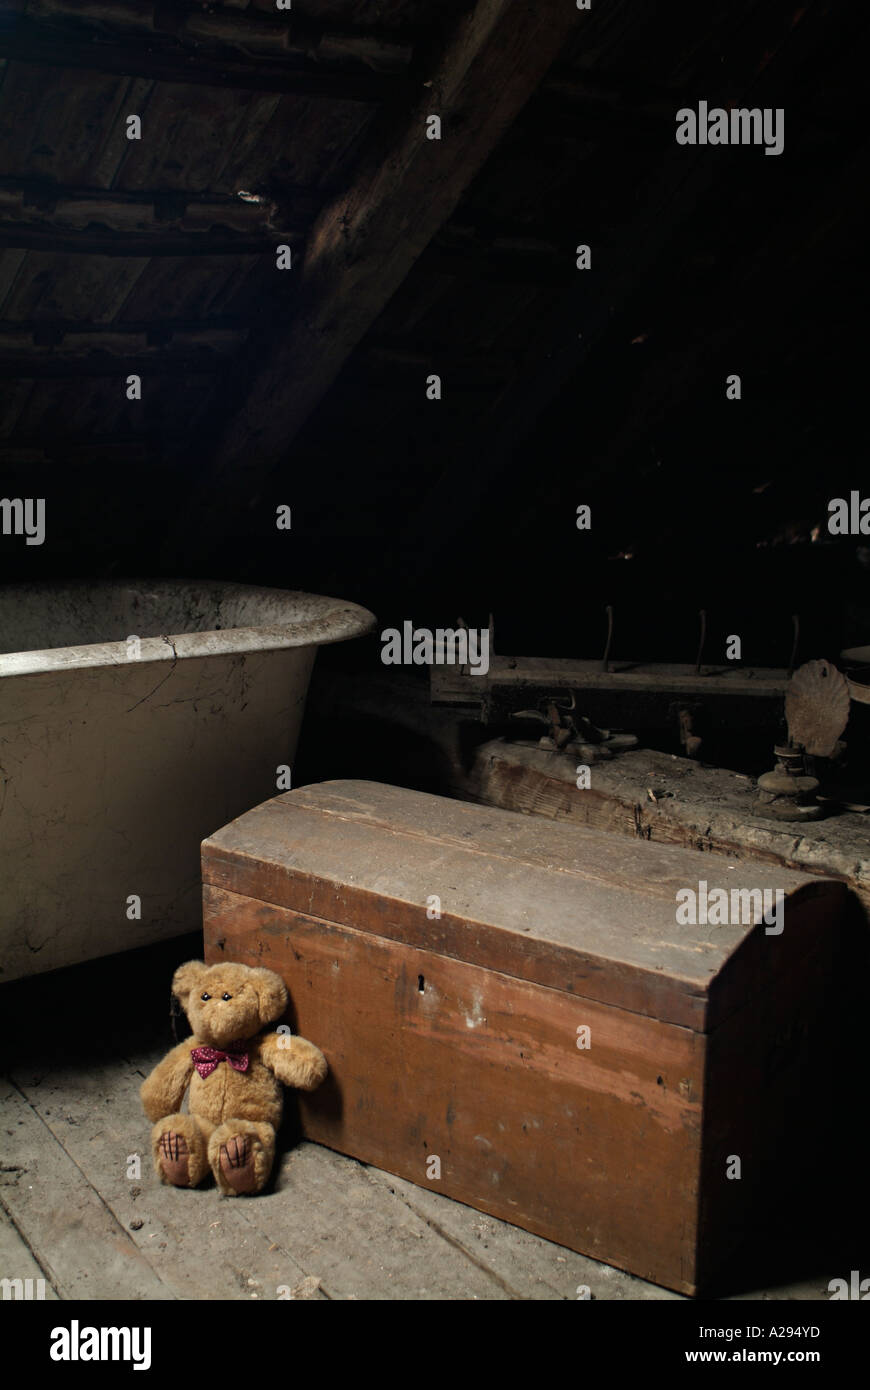 https://c8.alamy.com/comp/A294YD/teddy-bear-and-an-old-toy-box-in-the-dusty-attic-space-of-a-house-A294YD.jpg